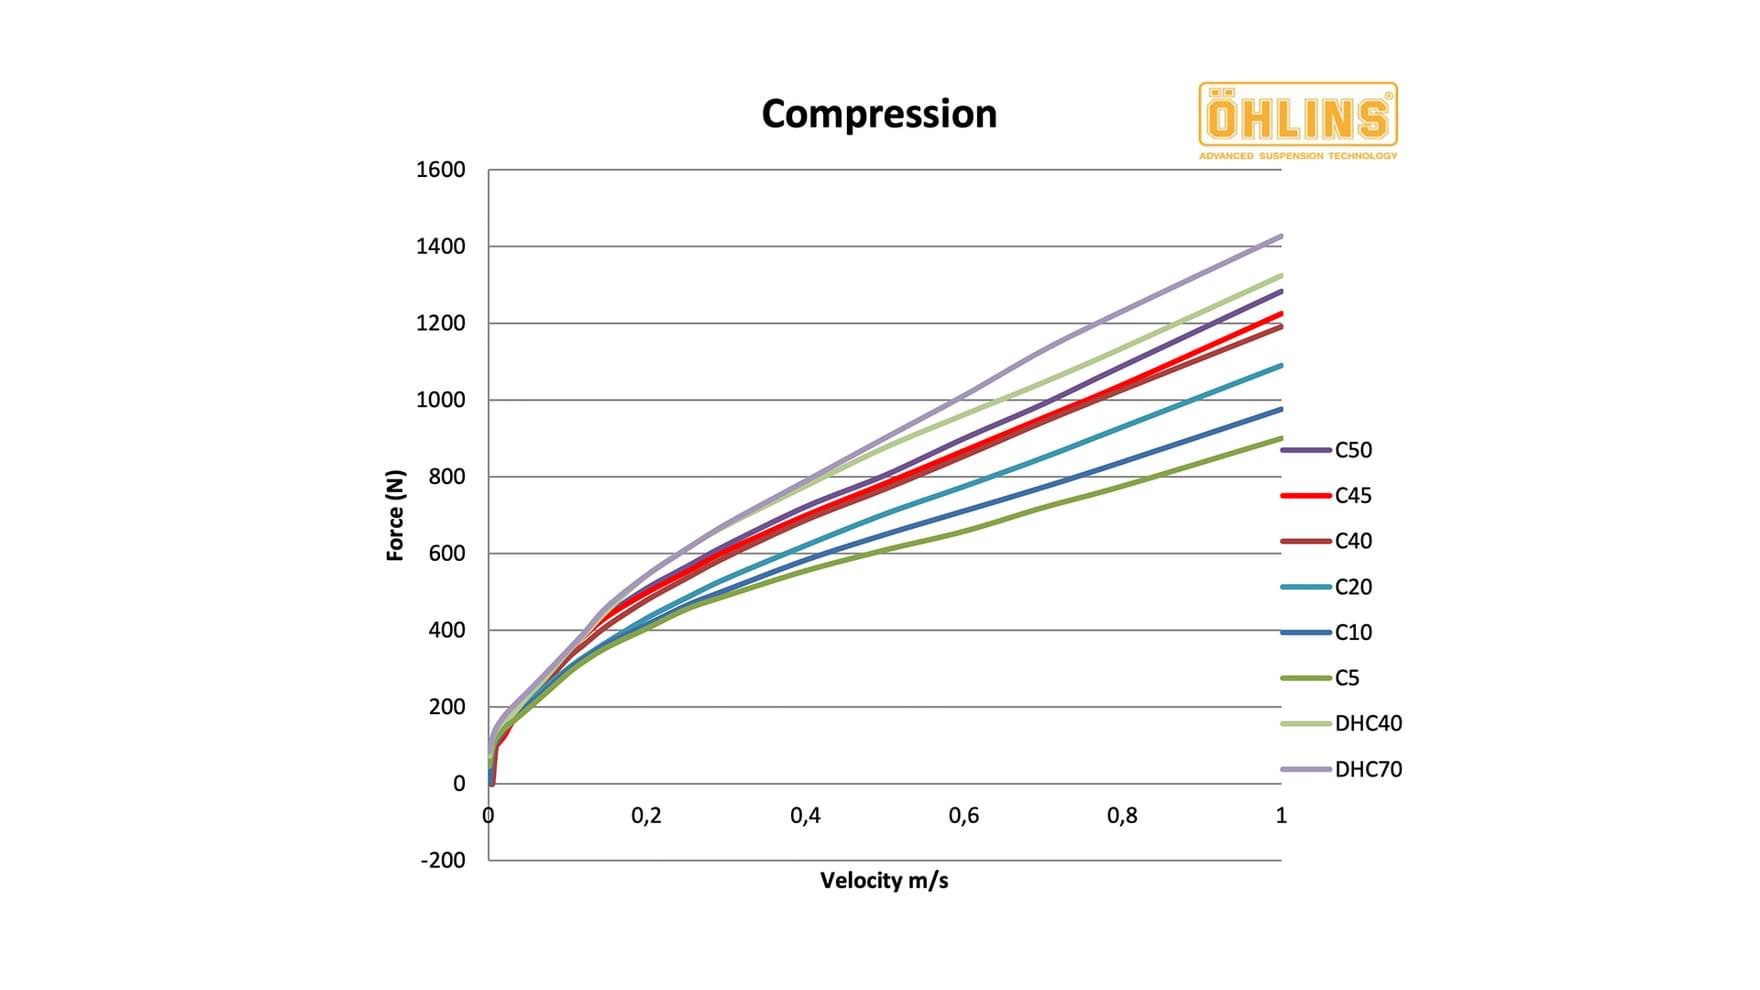 Ohlins TTX compression tuning